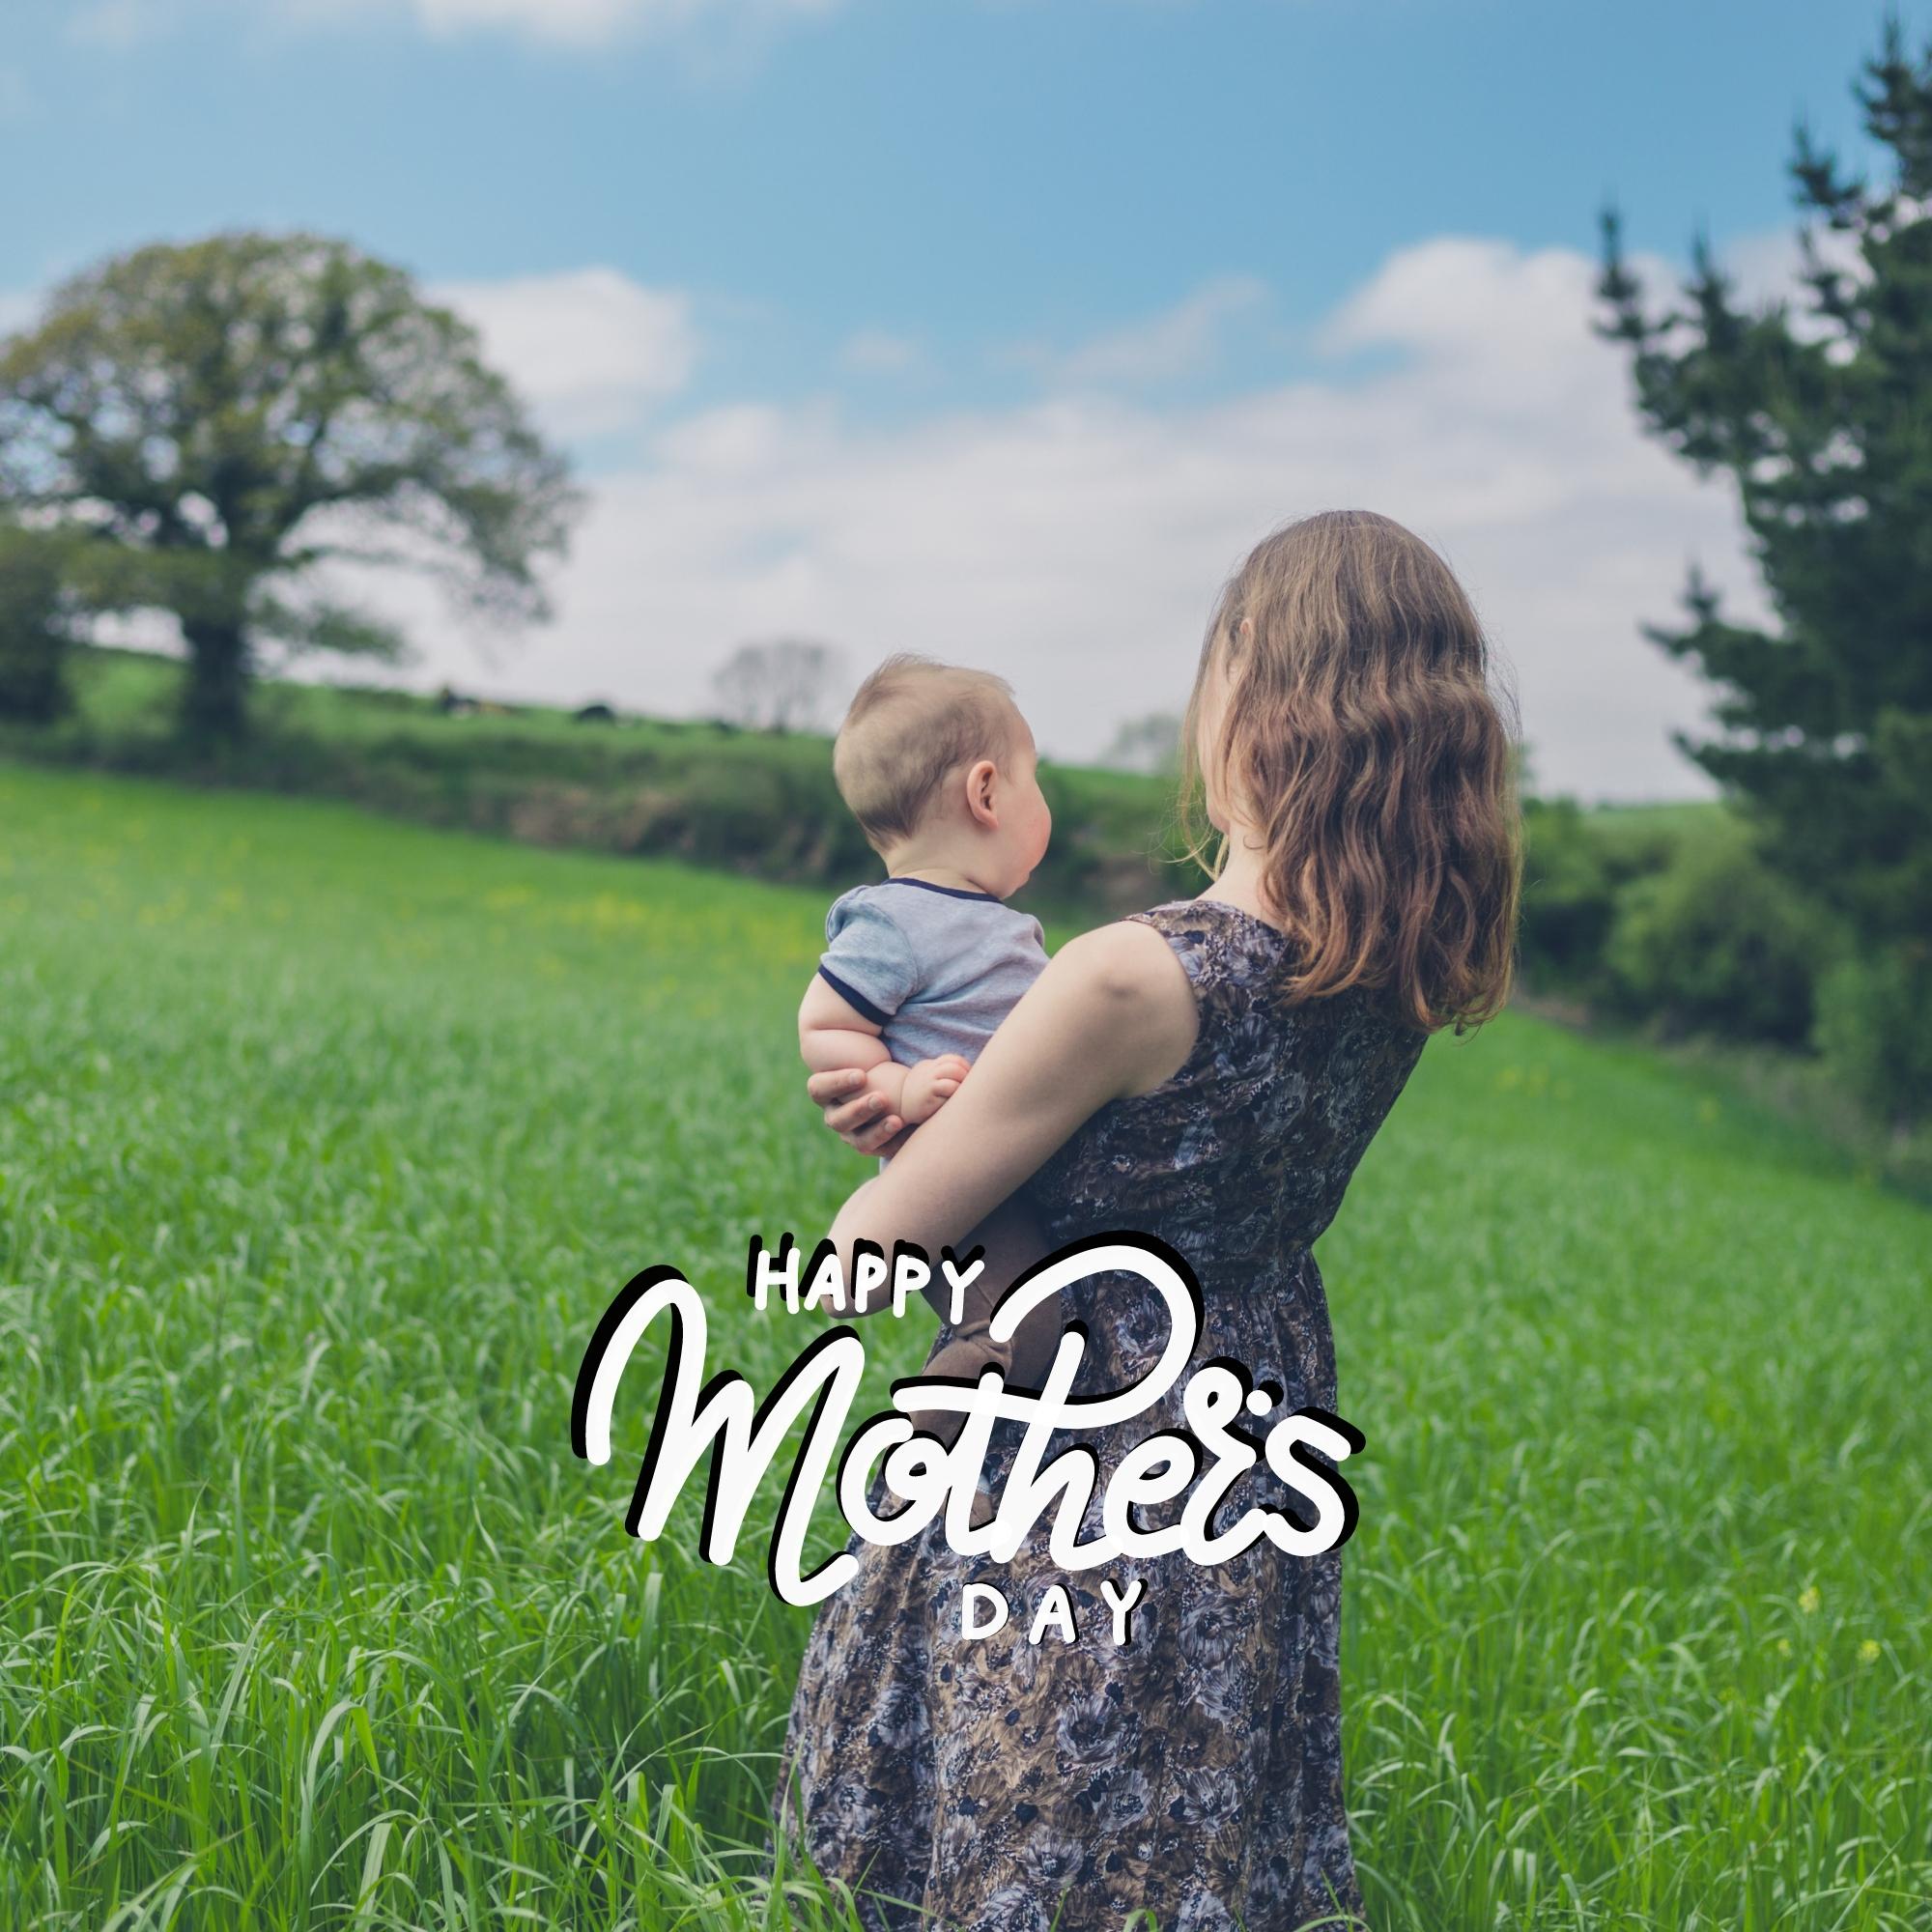 Happy Mothers Day Images | 1049 | Free Download [8k,4k,Hd]